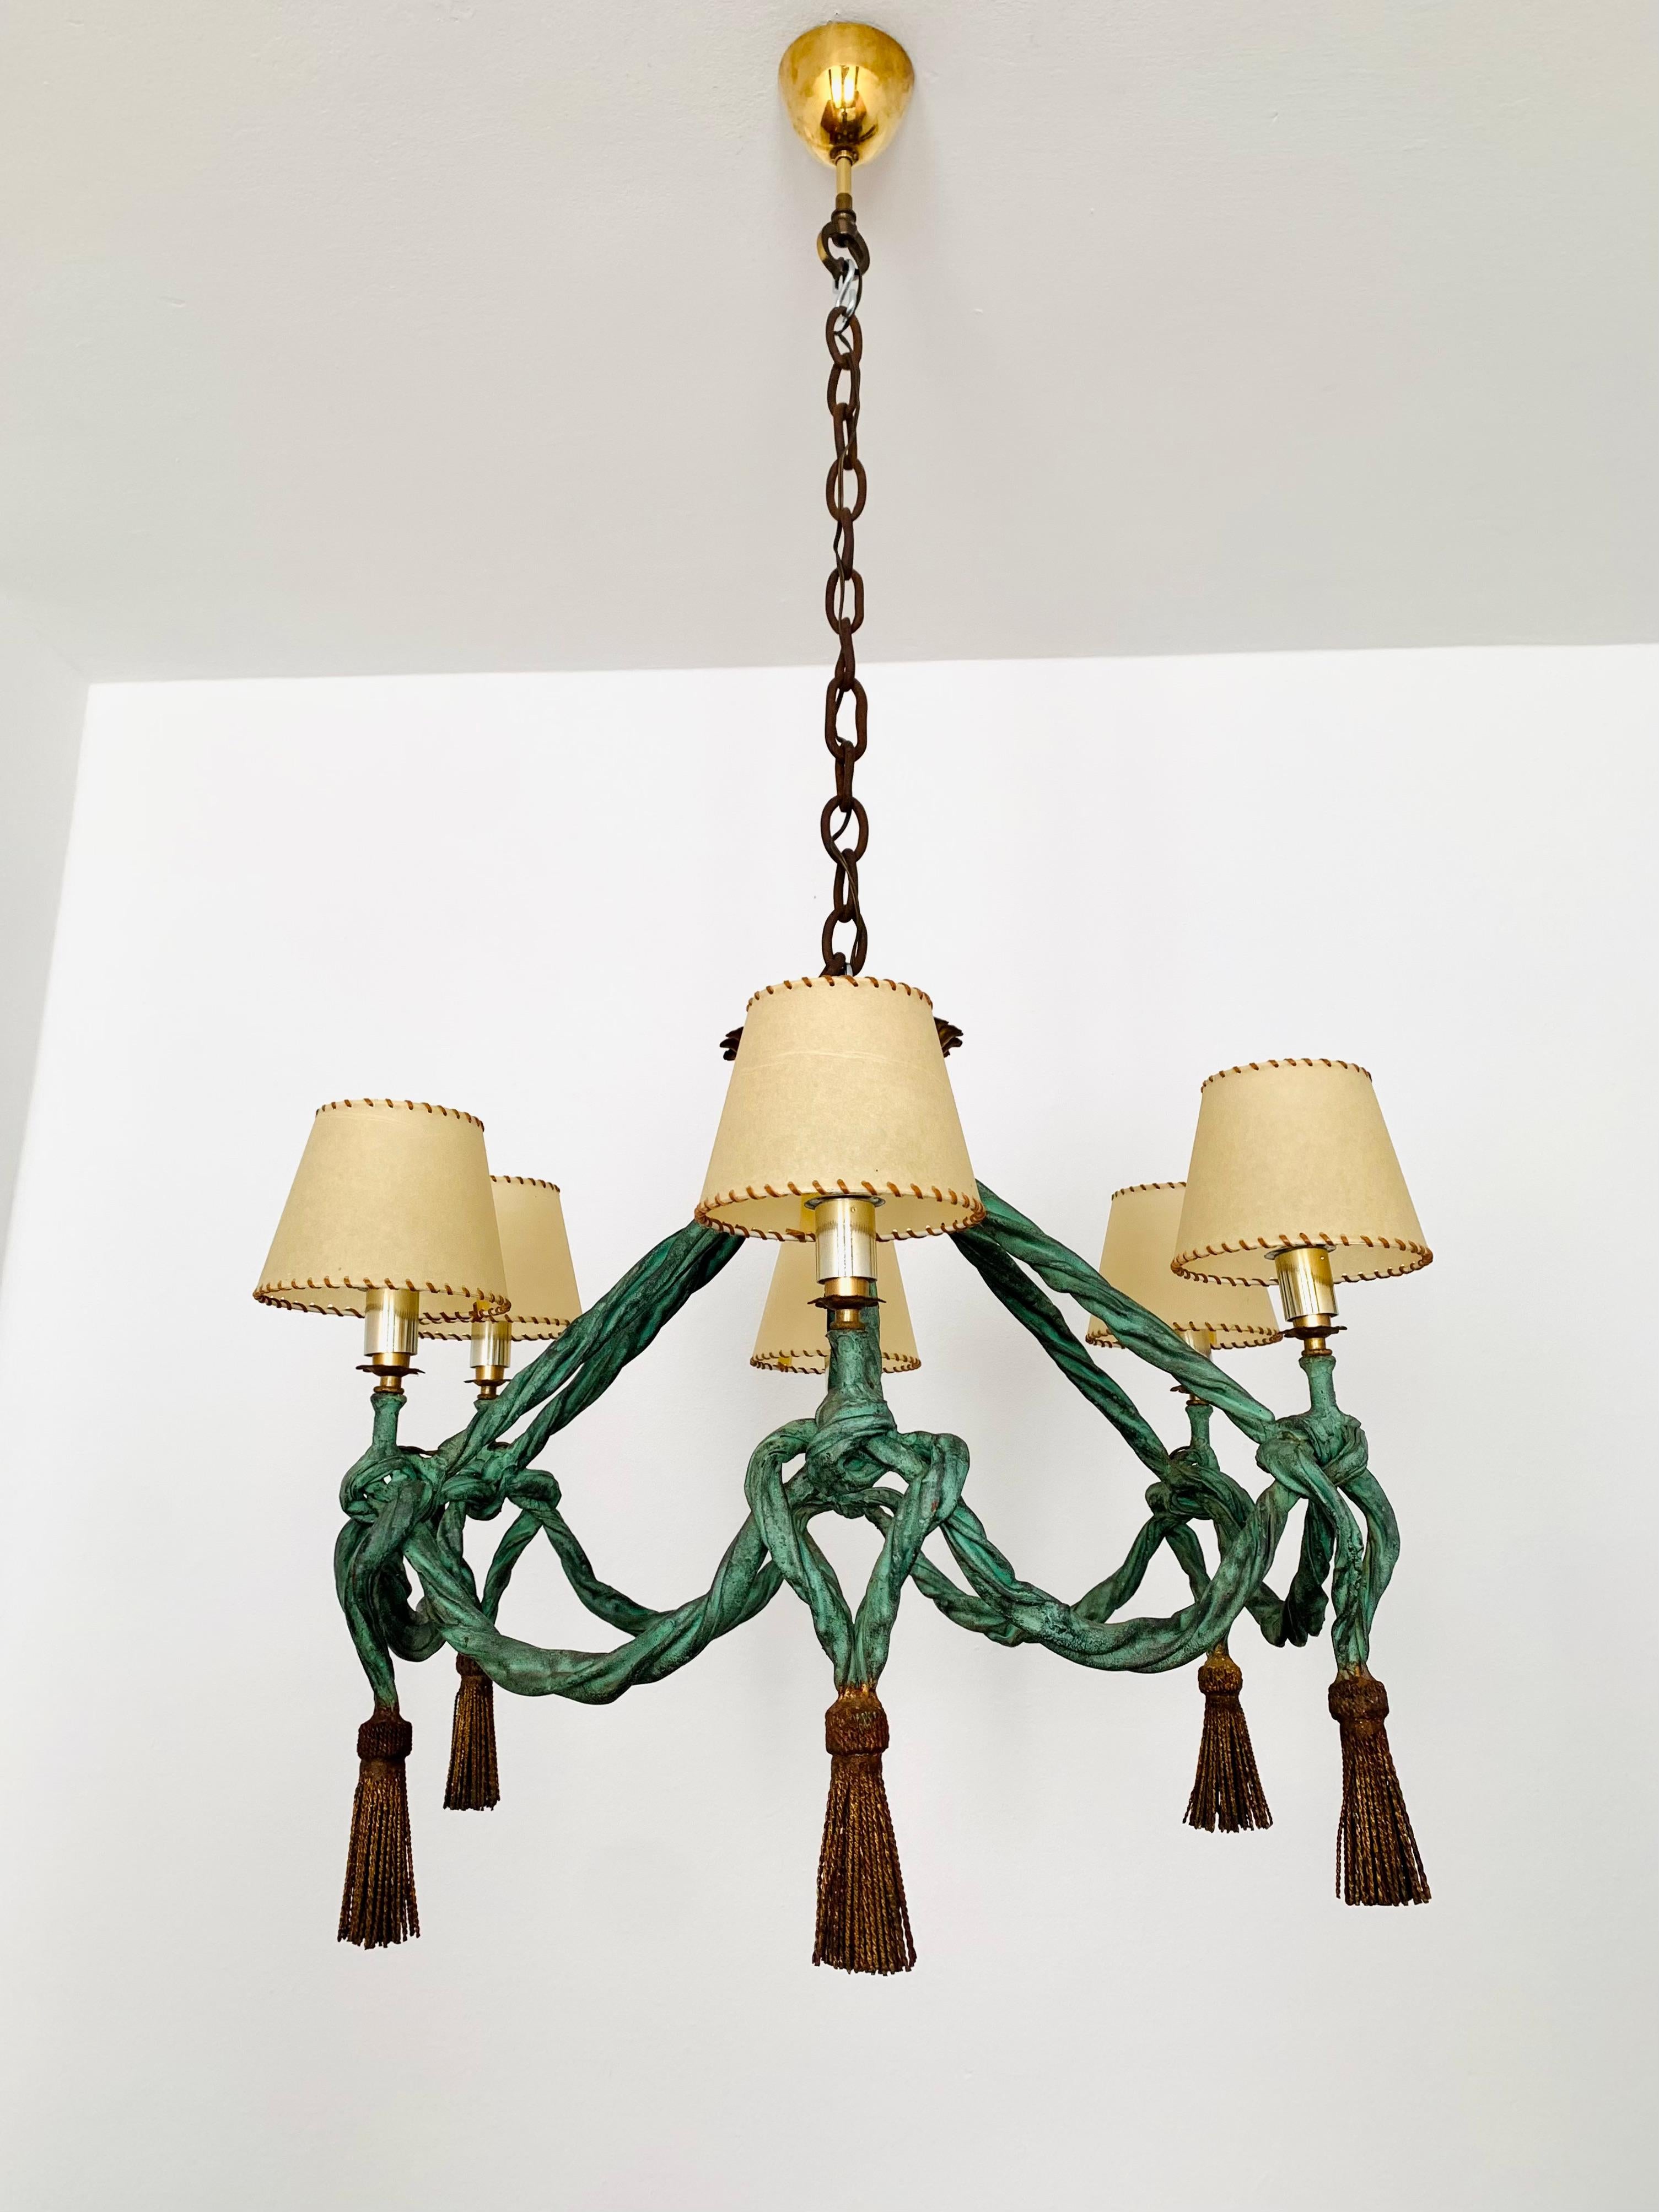 Exceptional decorative brutalistic chandelier from the 1960s.
Wonderful design and high -quality craftsmanship.
A warm light is created.

Condition:

Very good vintage condition with slight signs of wear.
The hand -forged chain has a beautiful rusty